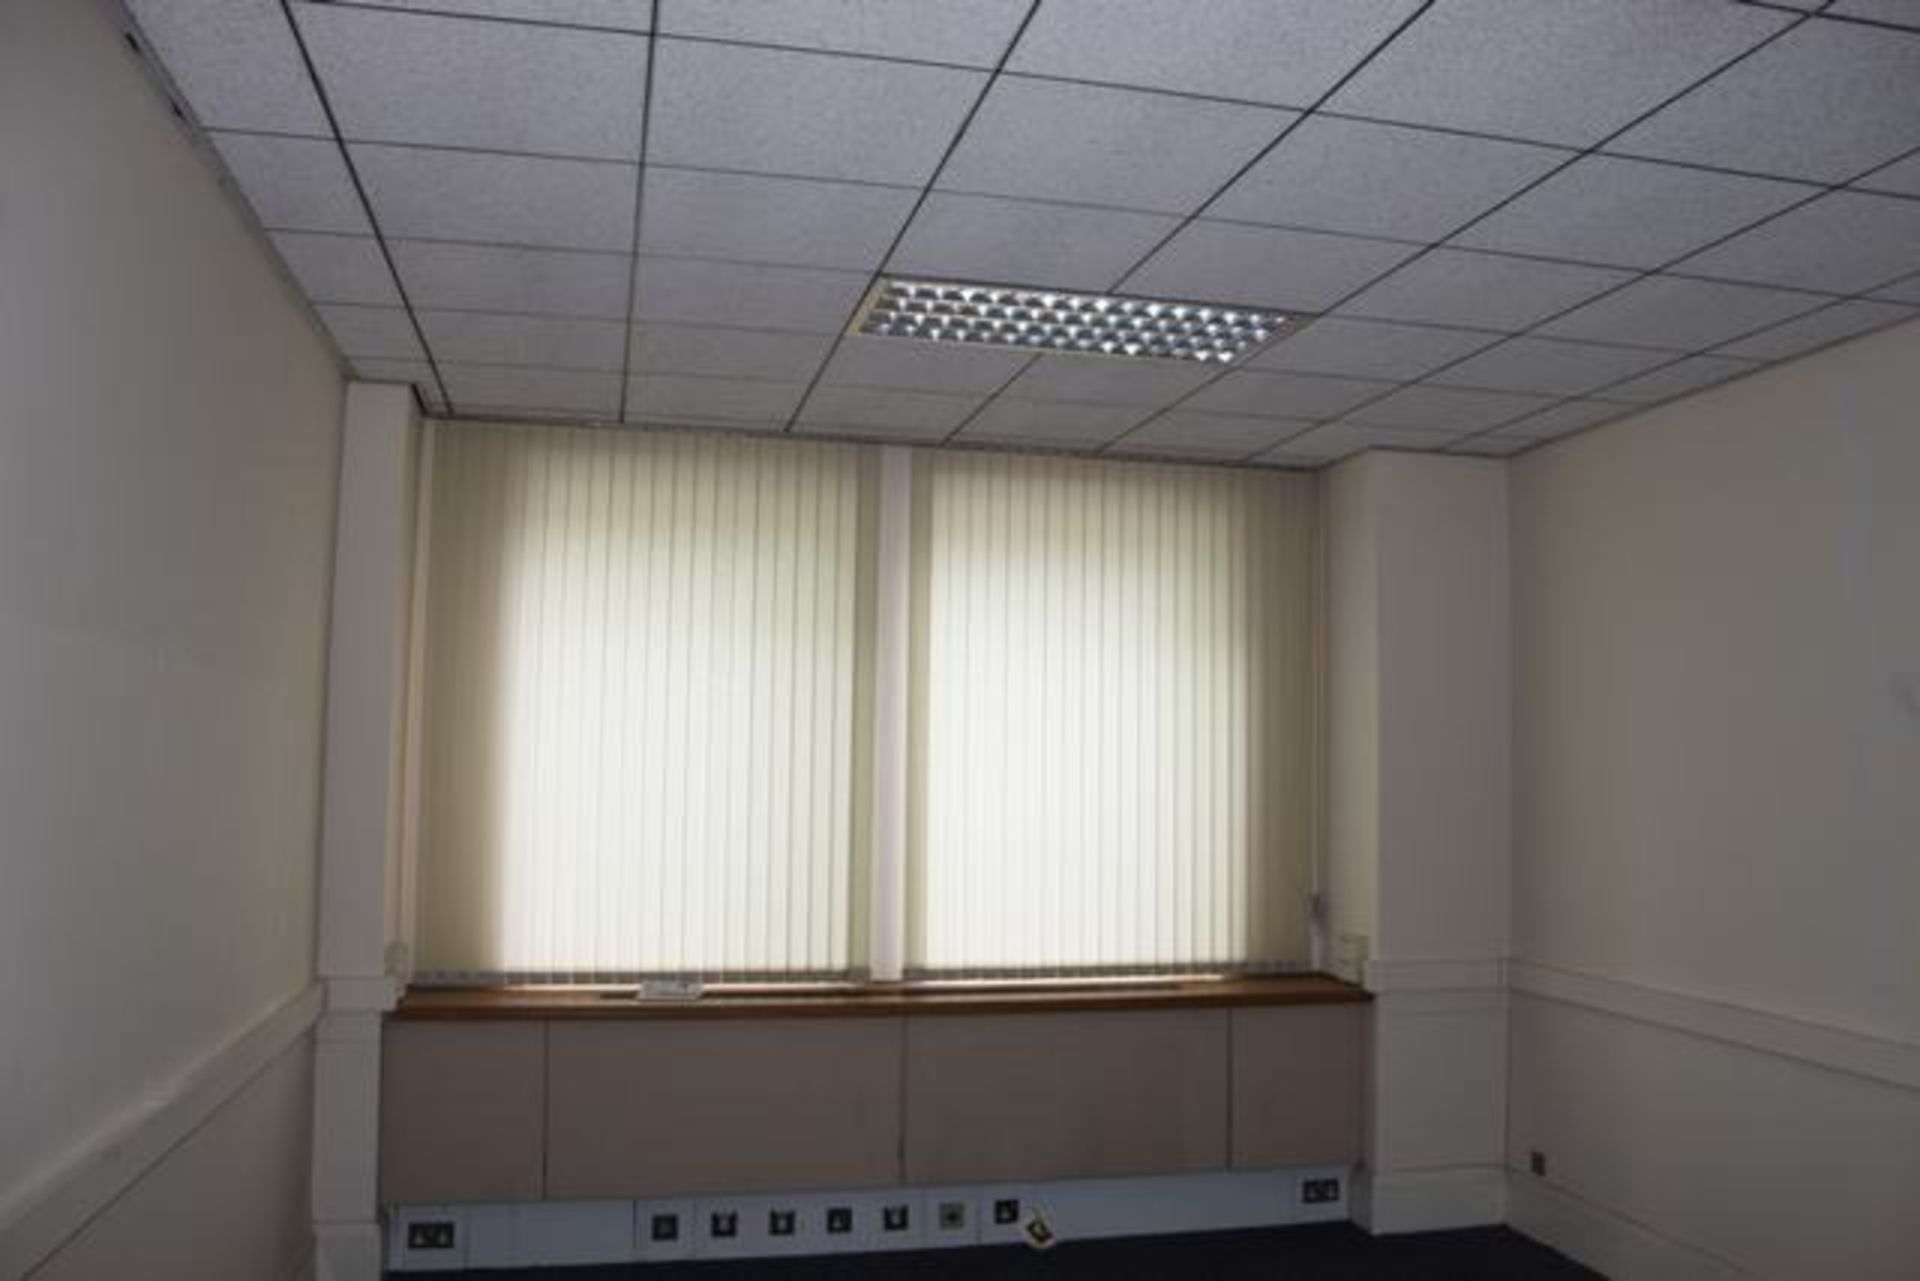 Vertical blind cream 2900mm x 2000mm complete with robust aluminium head rail with beaded tilt chain